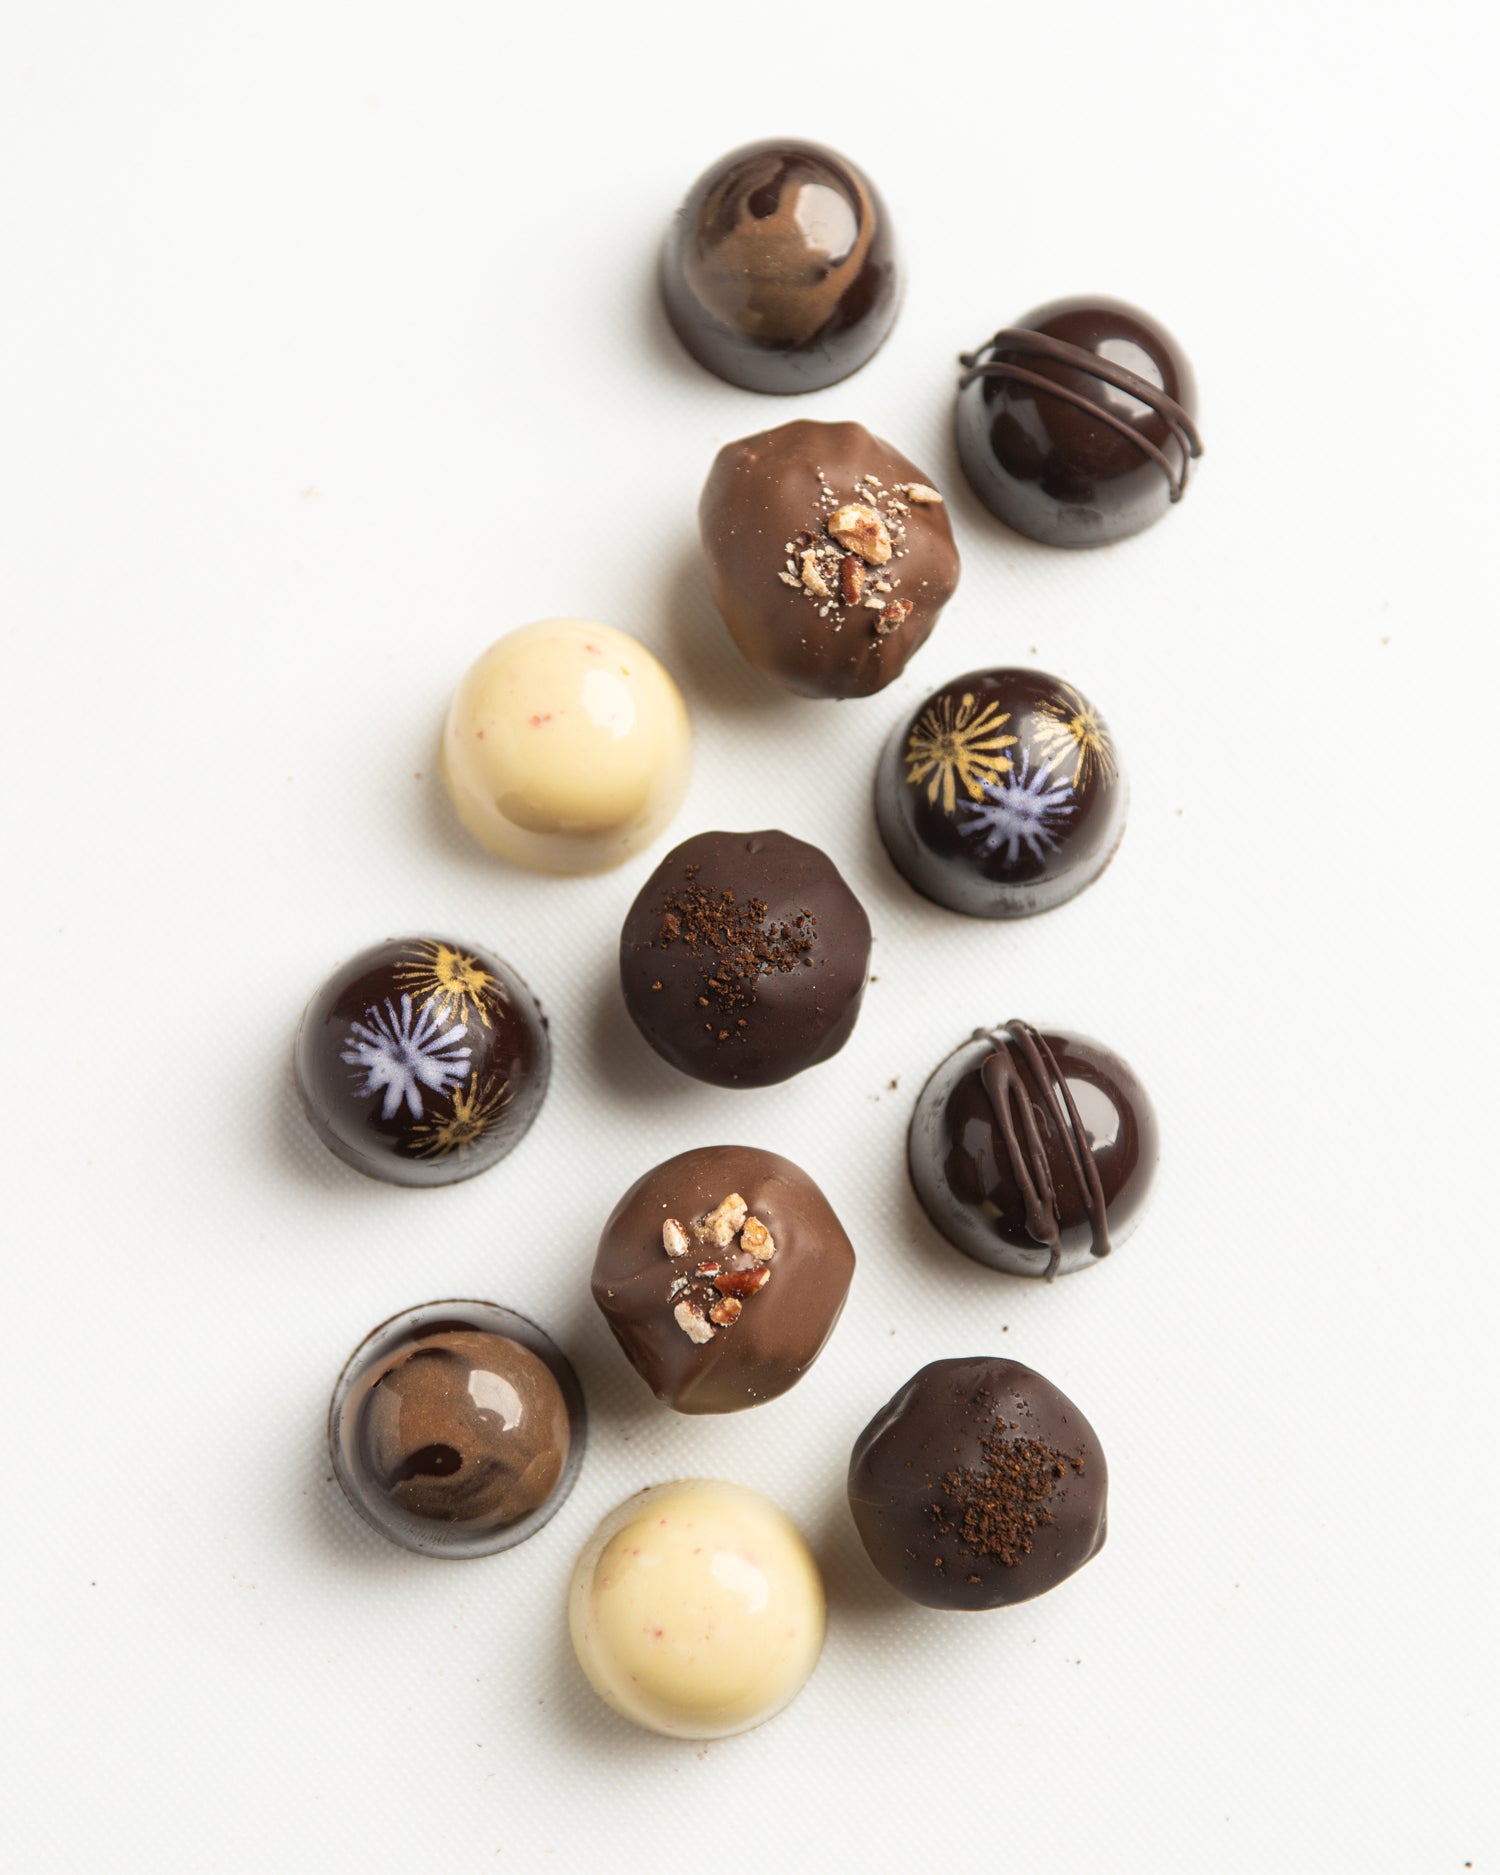 Winter Bonbon Assorted Collections - Bixby Chocolates